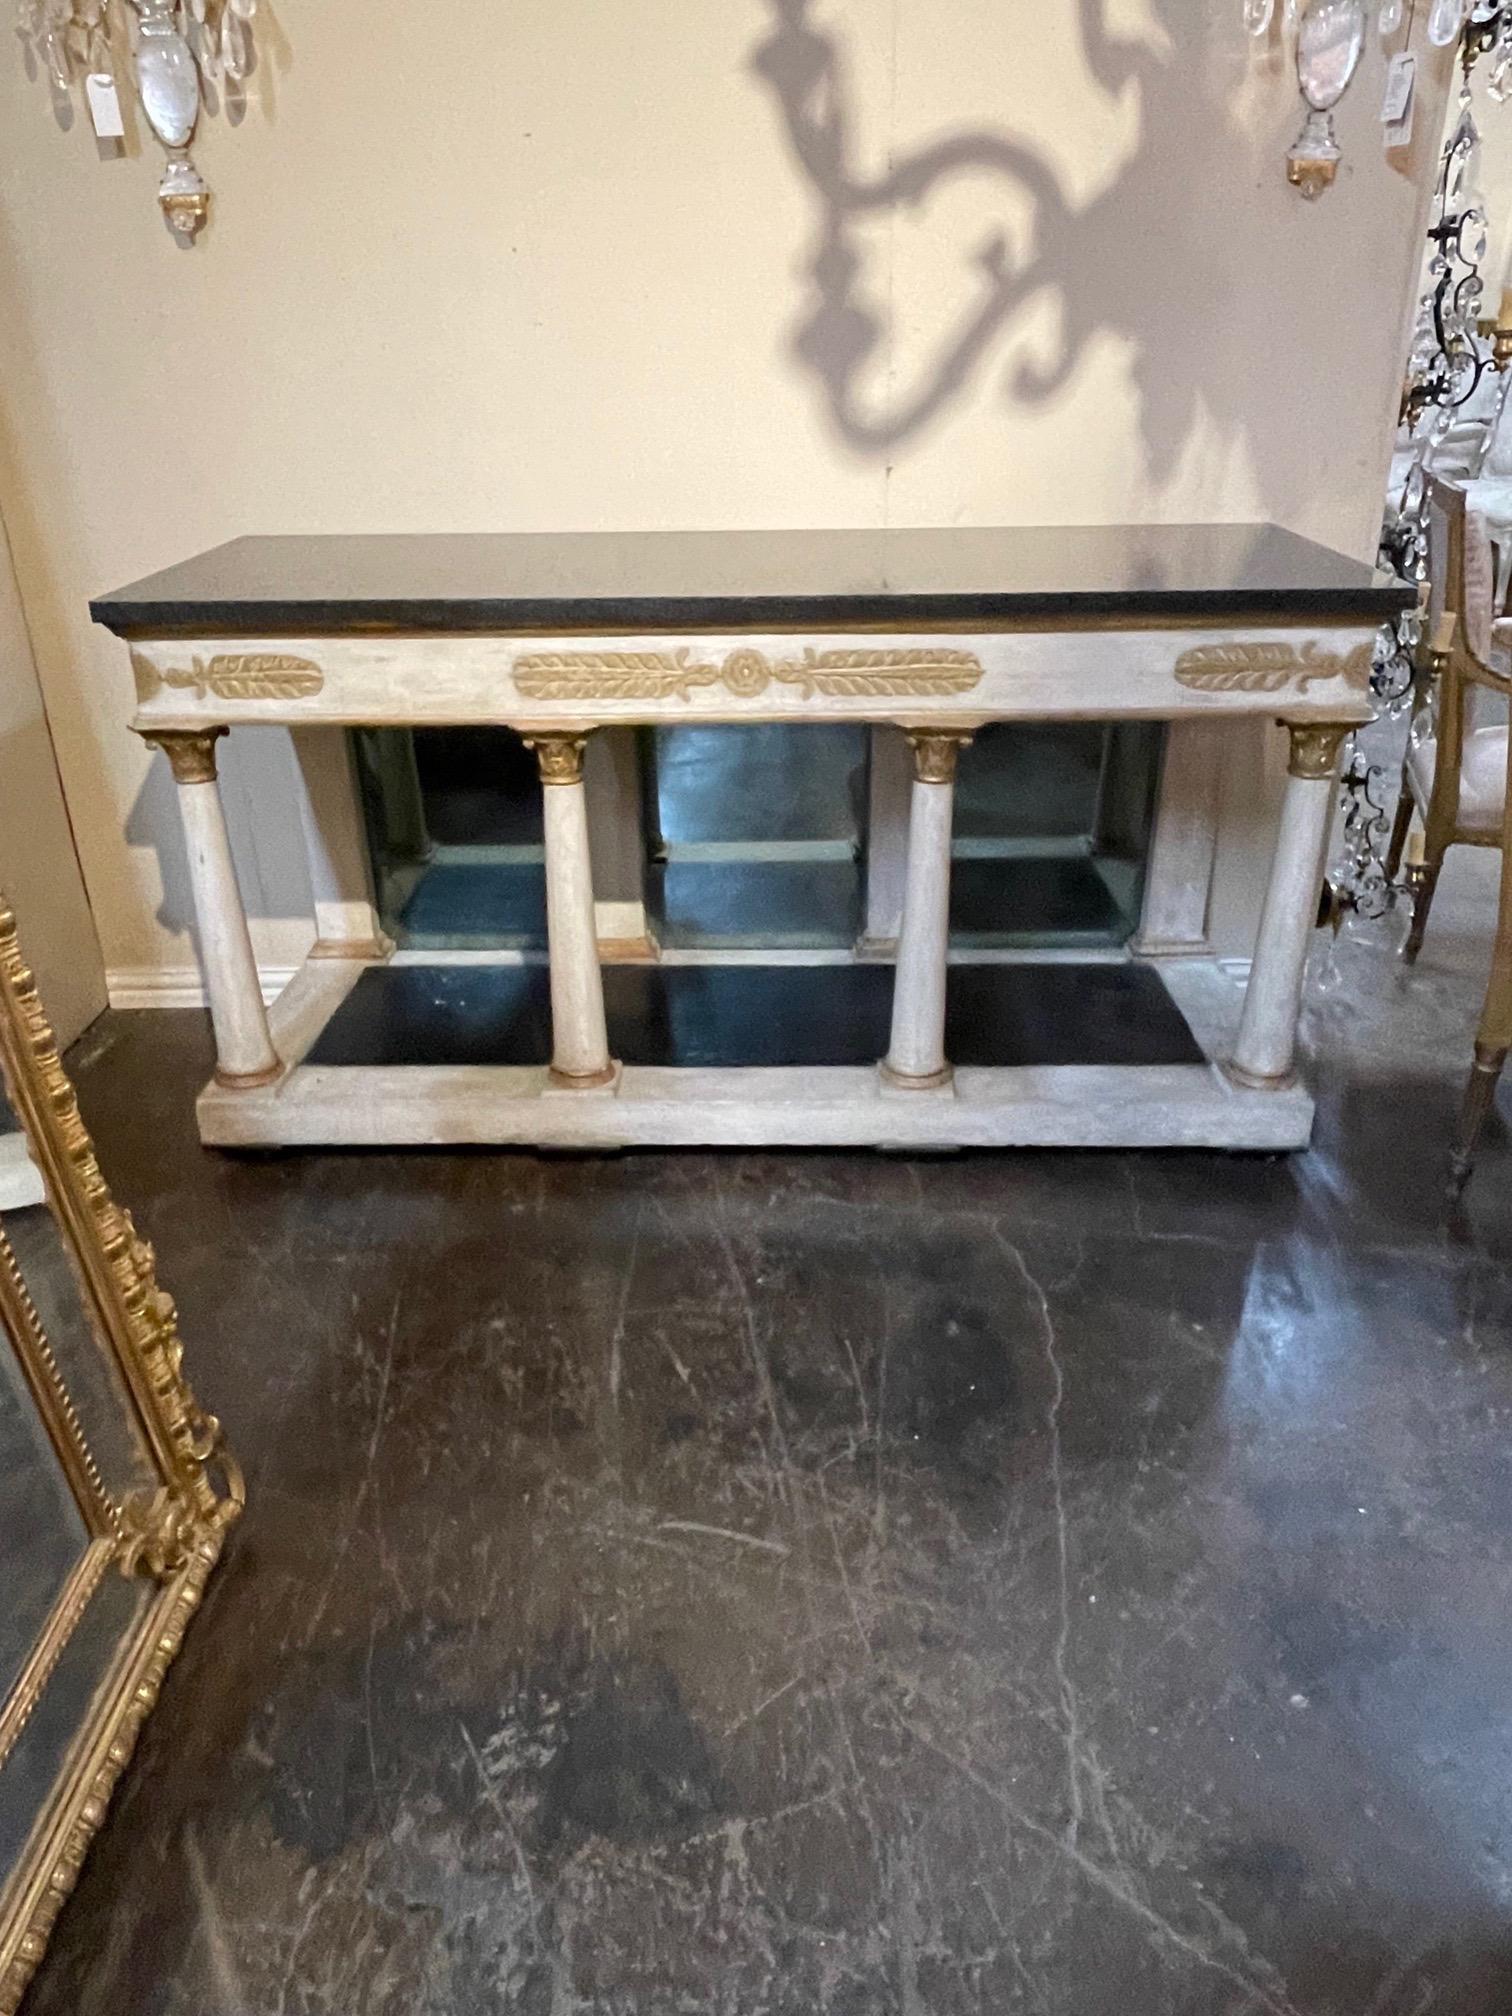 Very fine 19th century Italian carved and parcel gilt console with black marble top. Nice patina along with pretty clean lines. Great for a variety of decors!